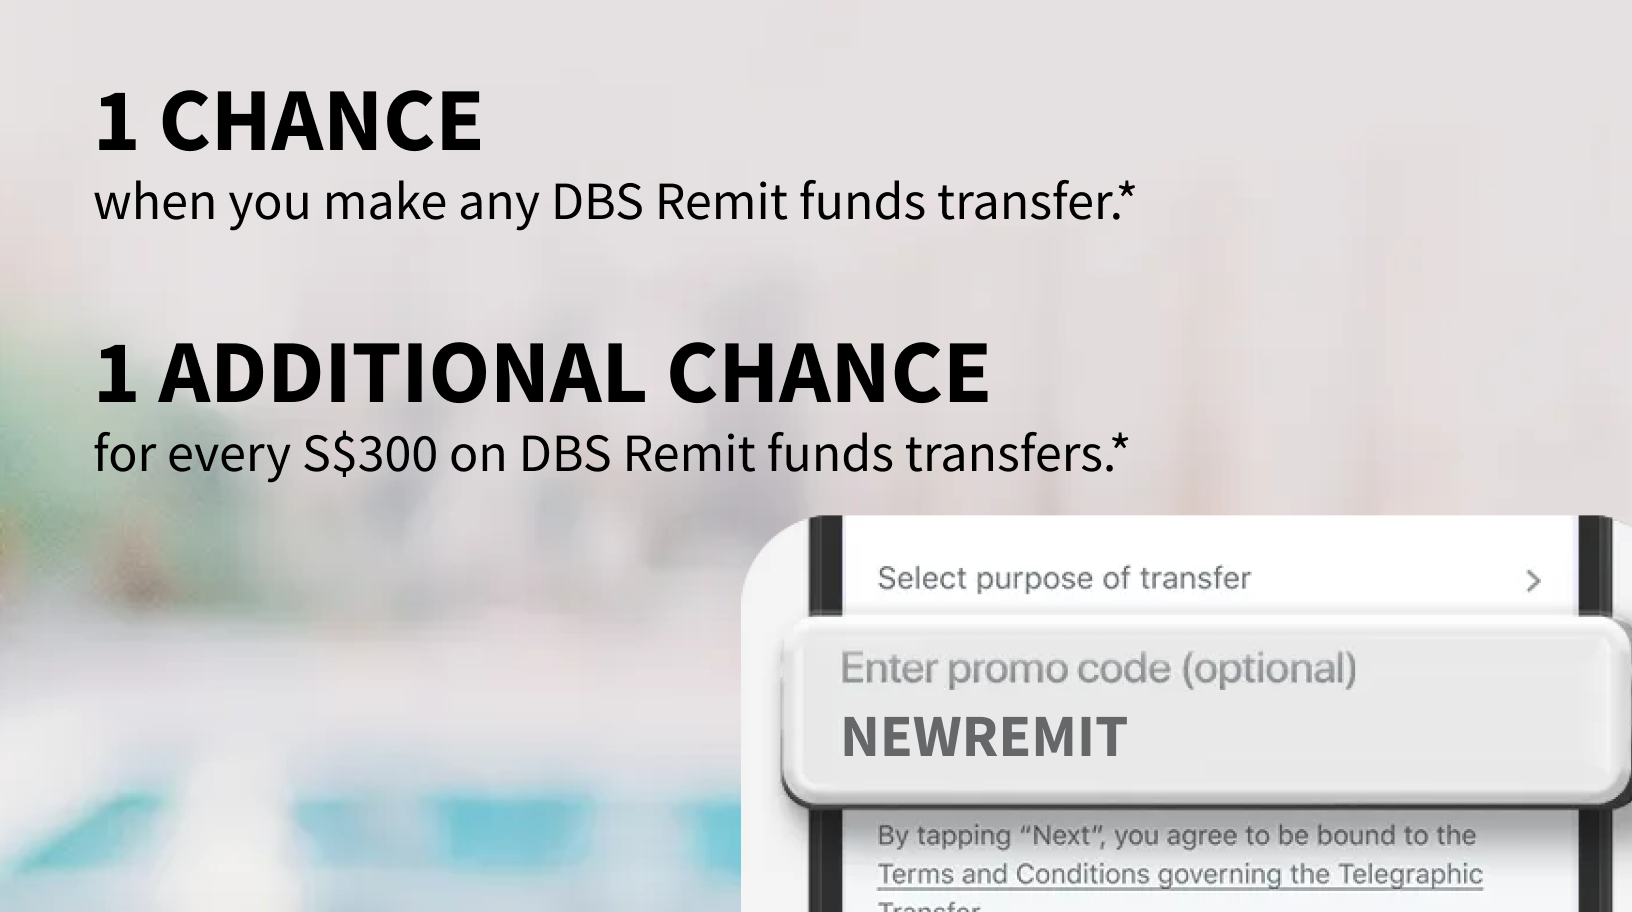 DBS Remit: Send funds safely across the world with S$0 fee & same-day transfers